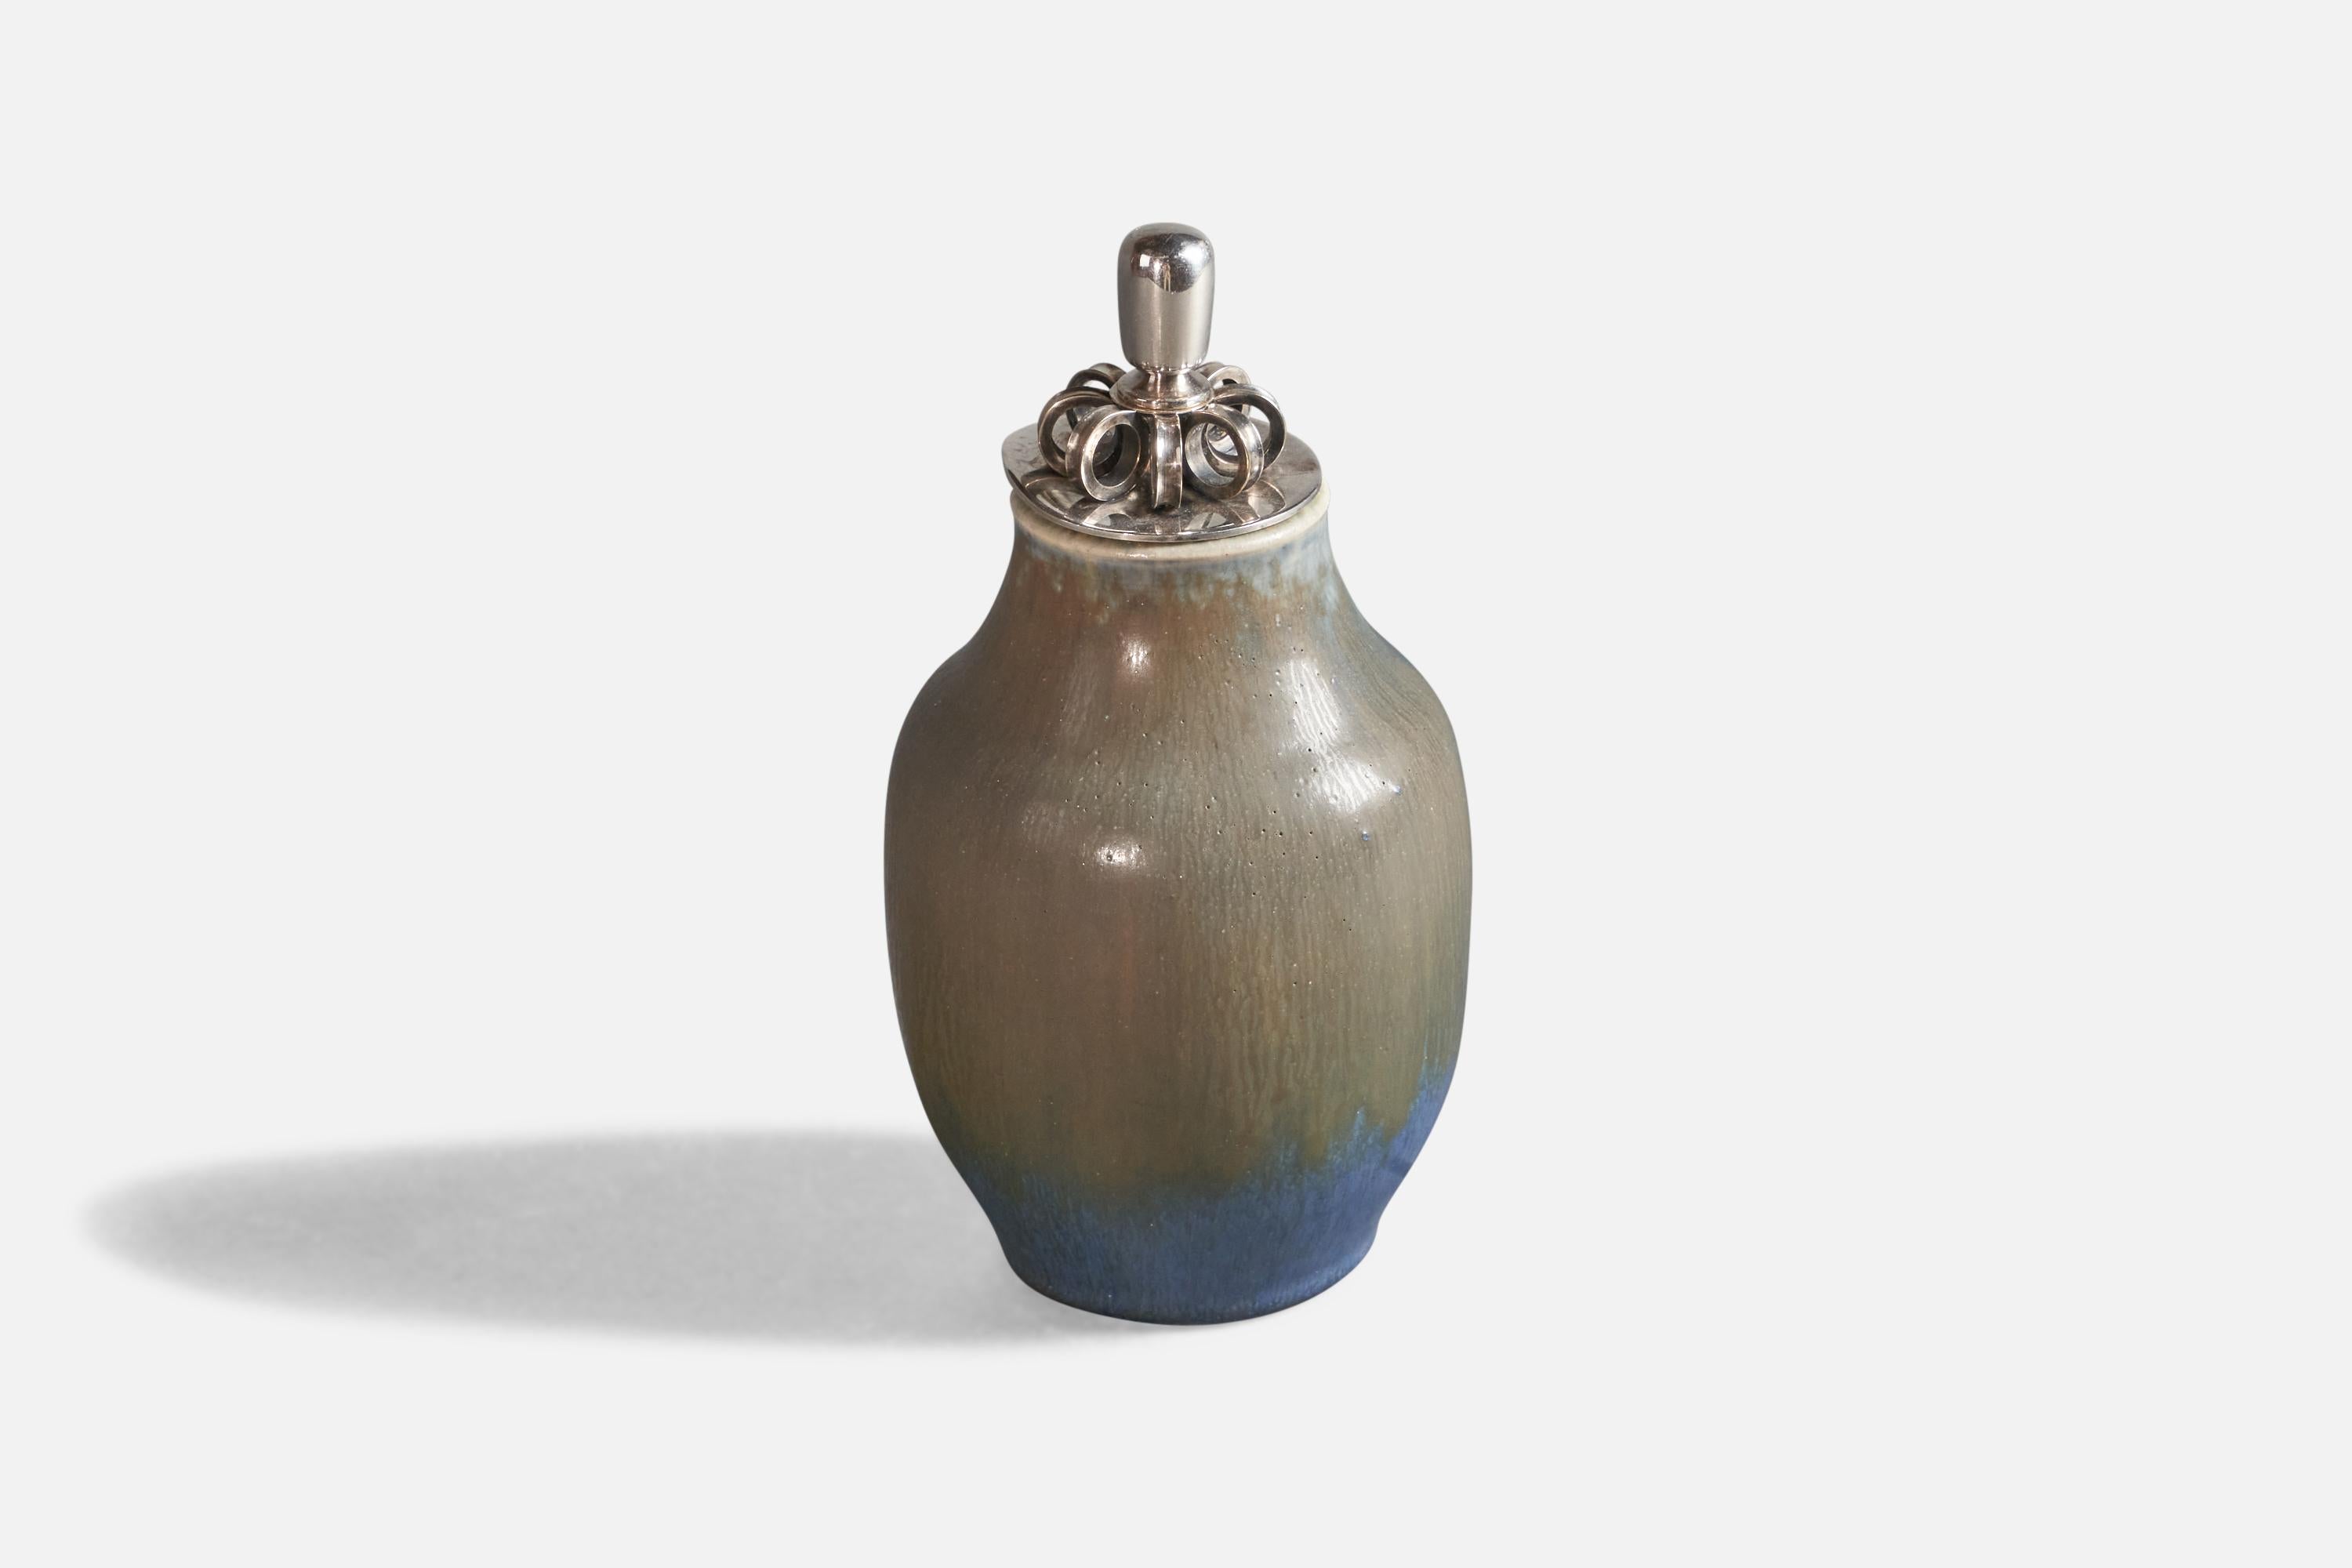 A blue and grey-glazed stoneware vase with silver plated lid, designed and produced by Michael Andersen, Bornholm, Denmark, c. 1960s.